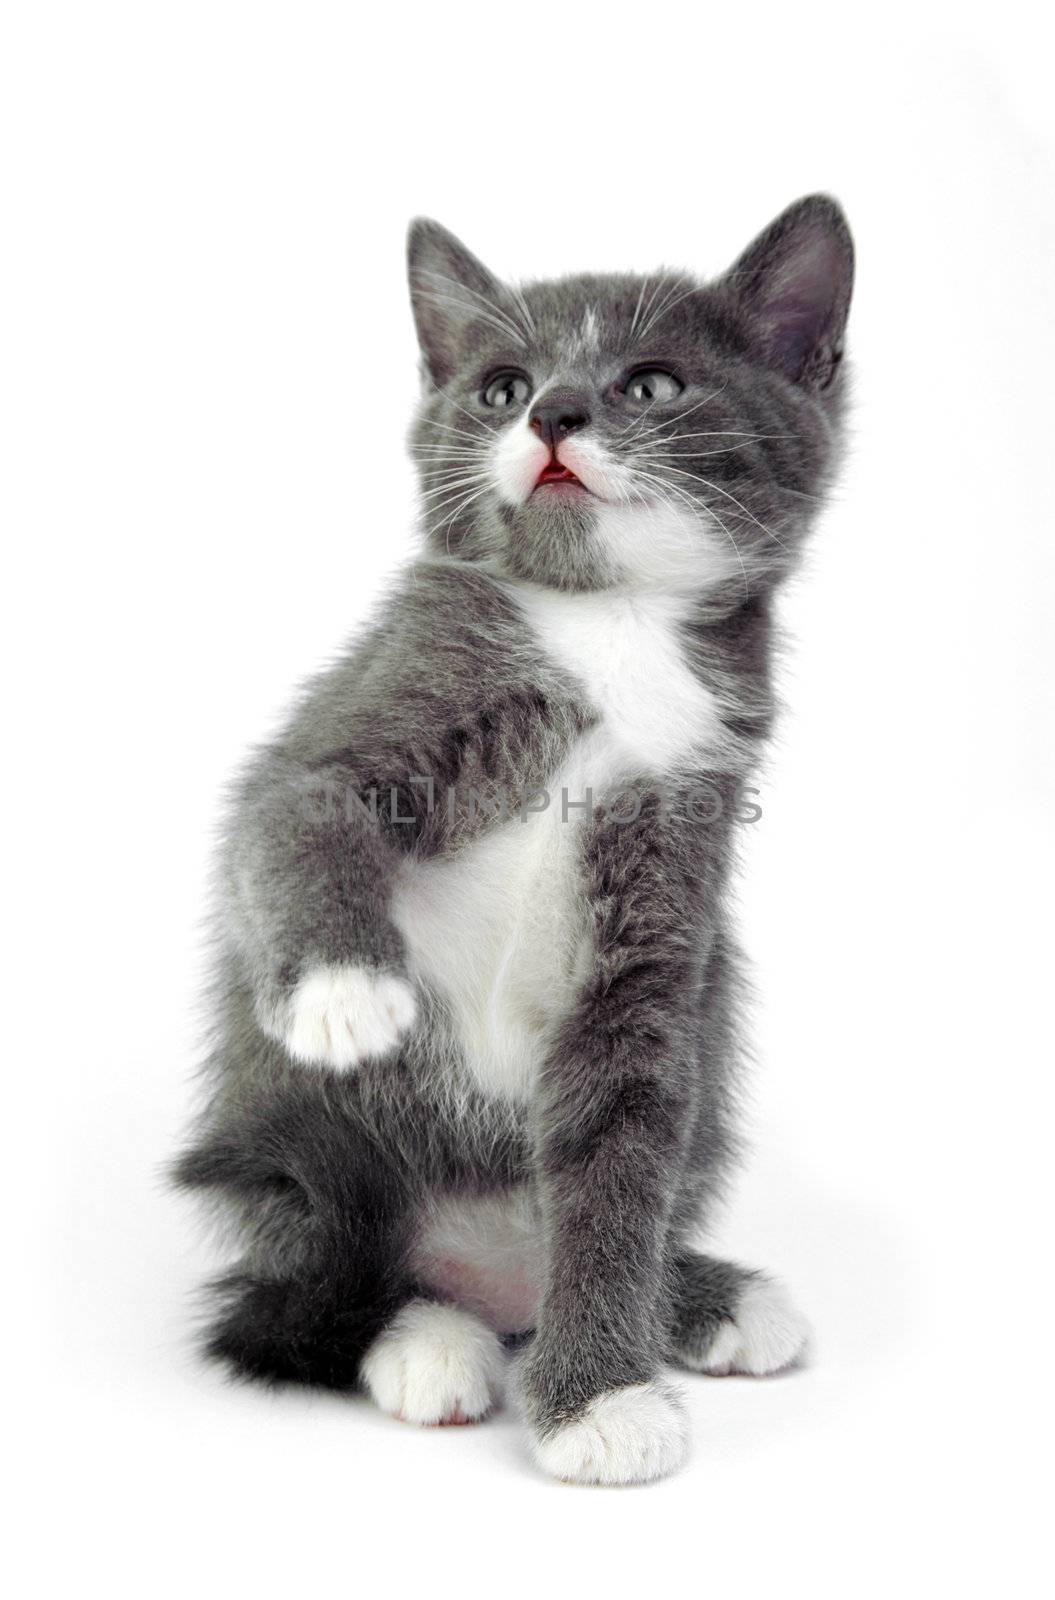 An image of a little grey cat on white background